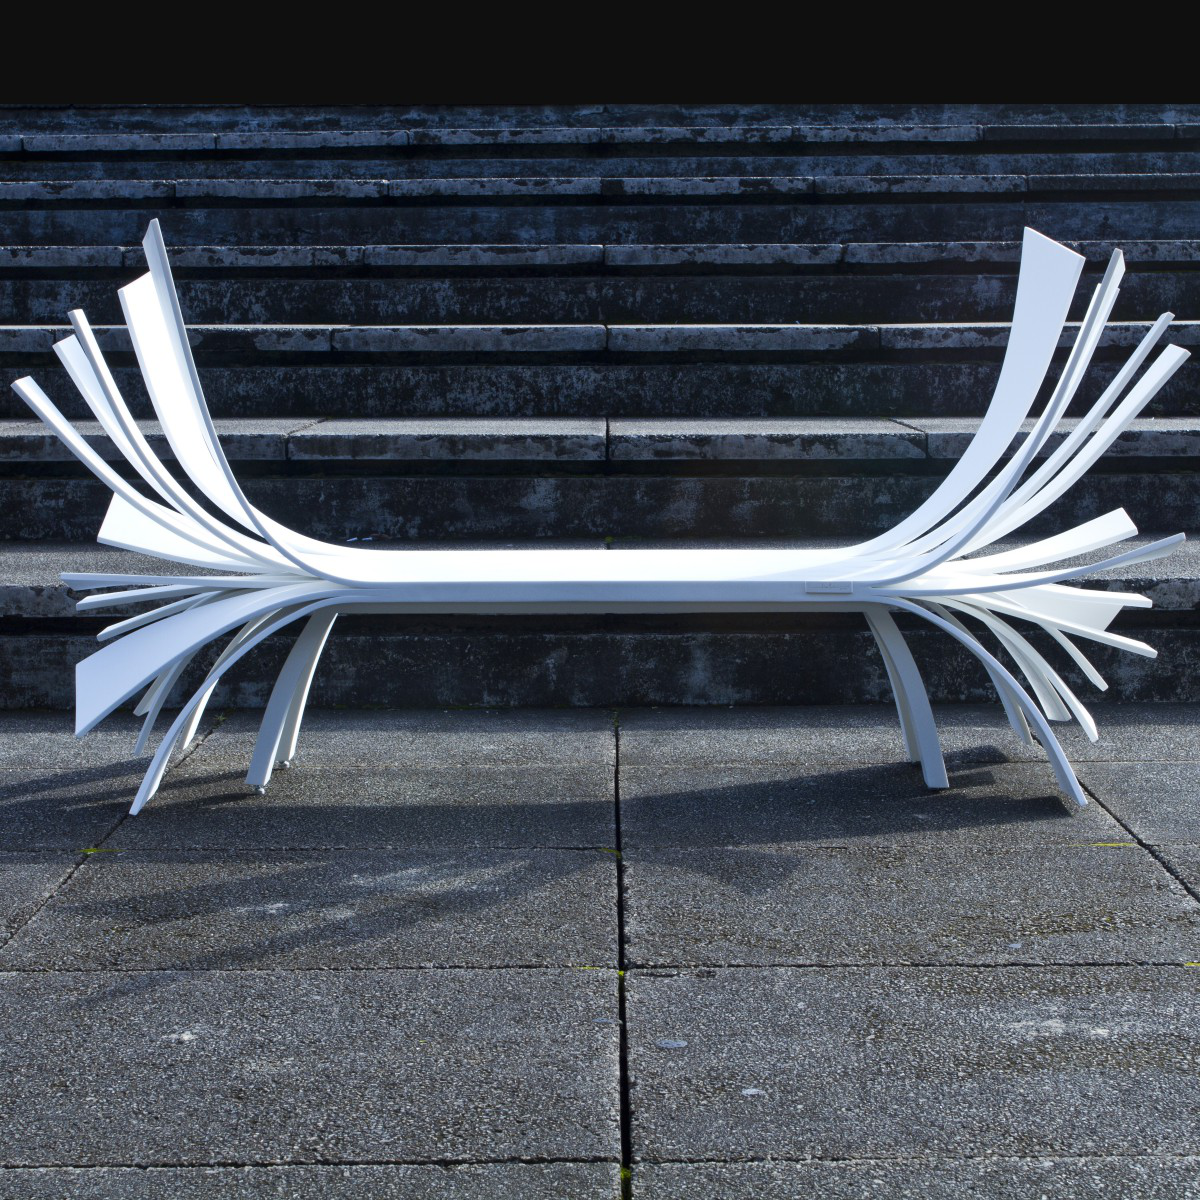 Angel  Bench by Tiago Curioni